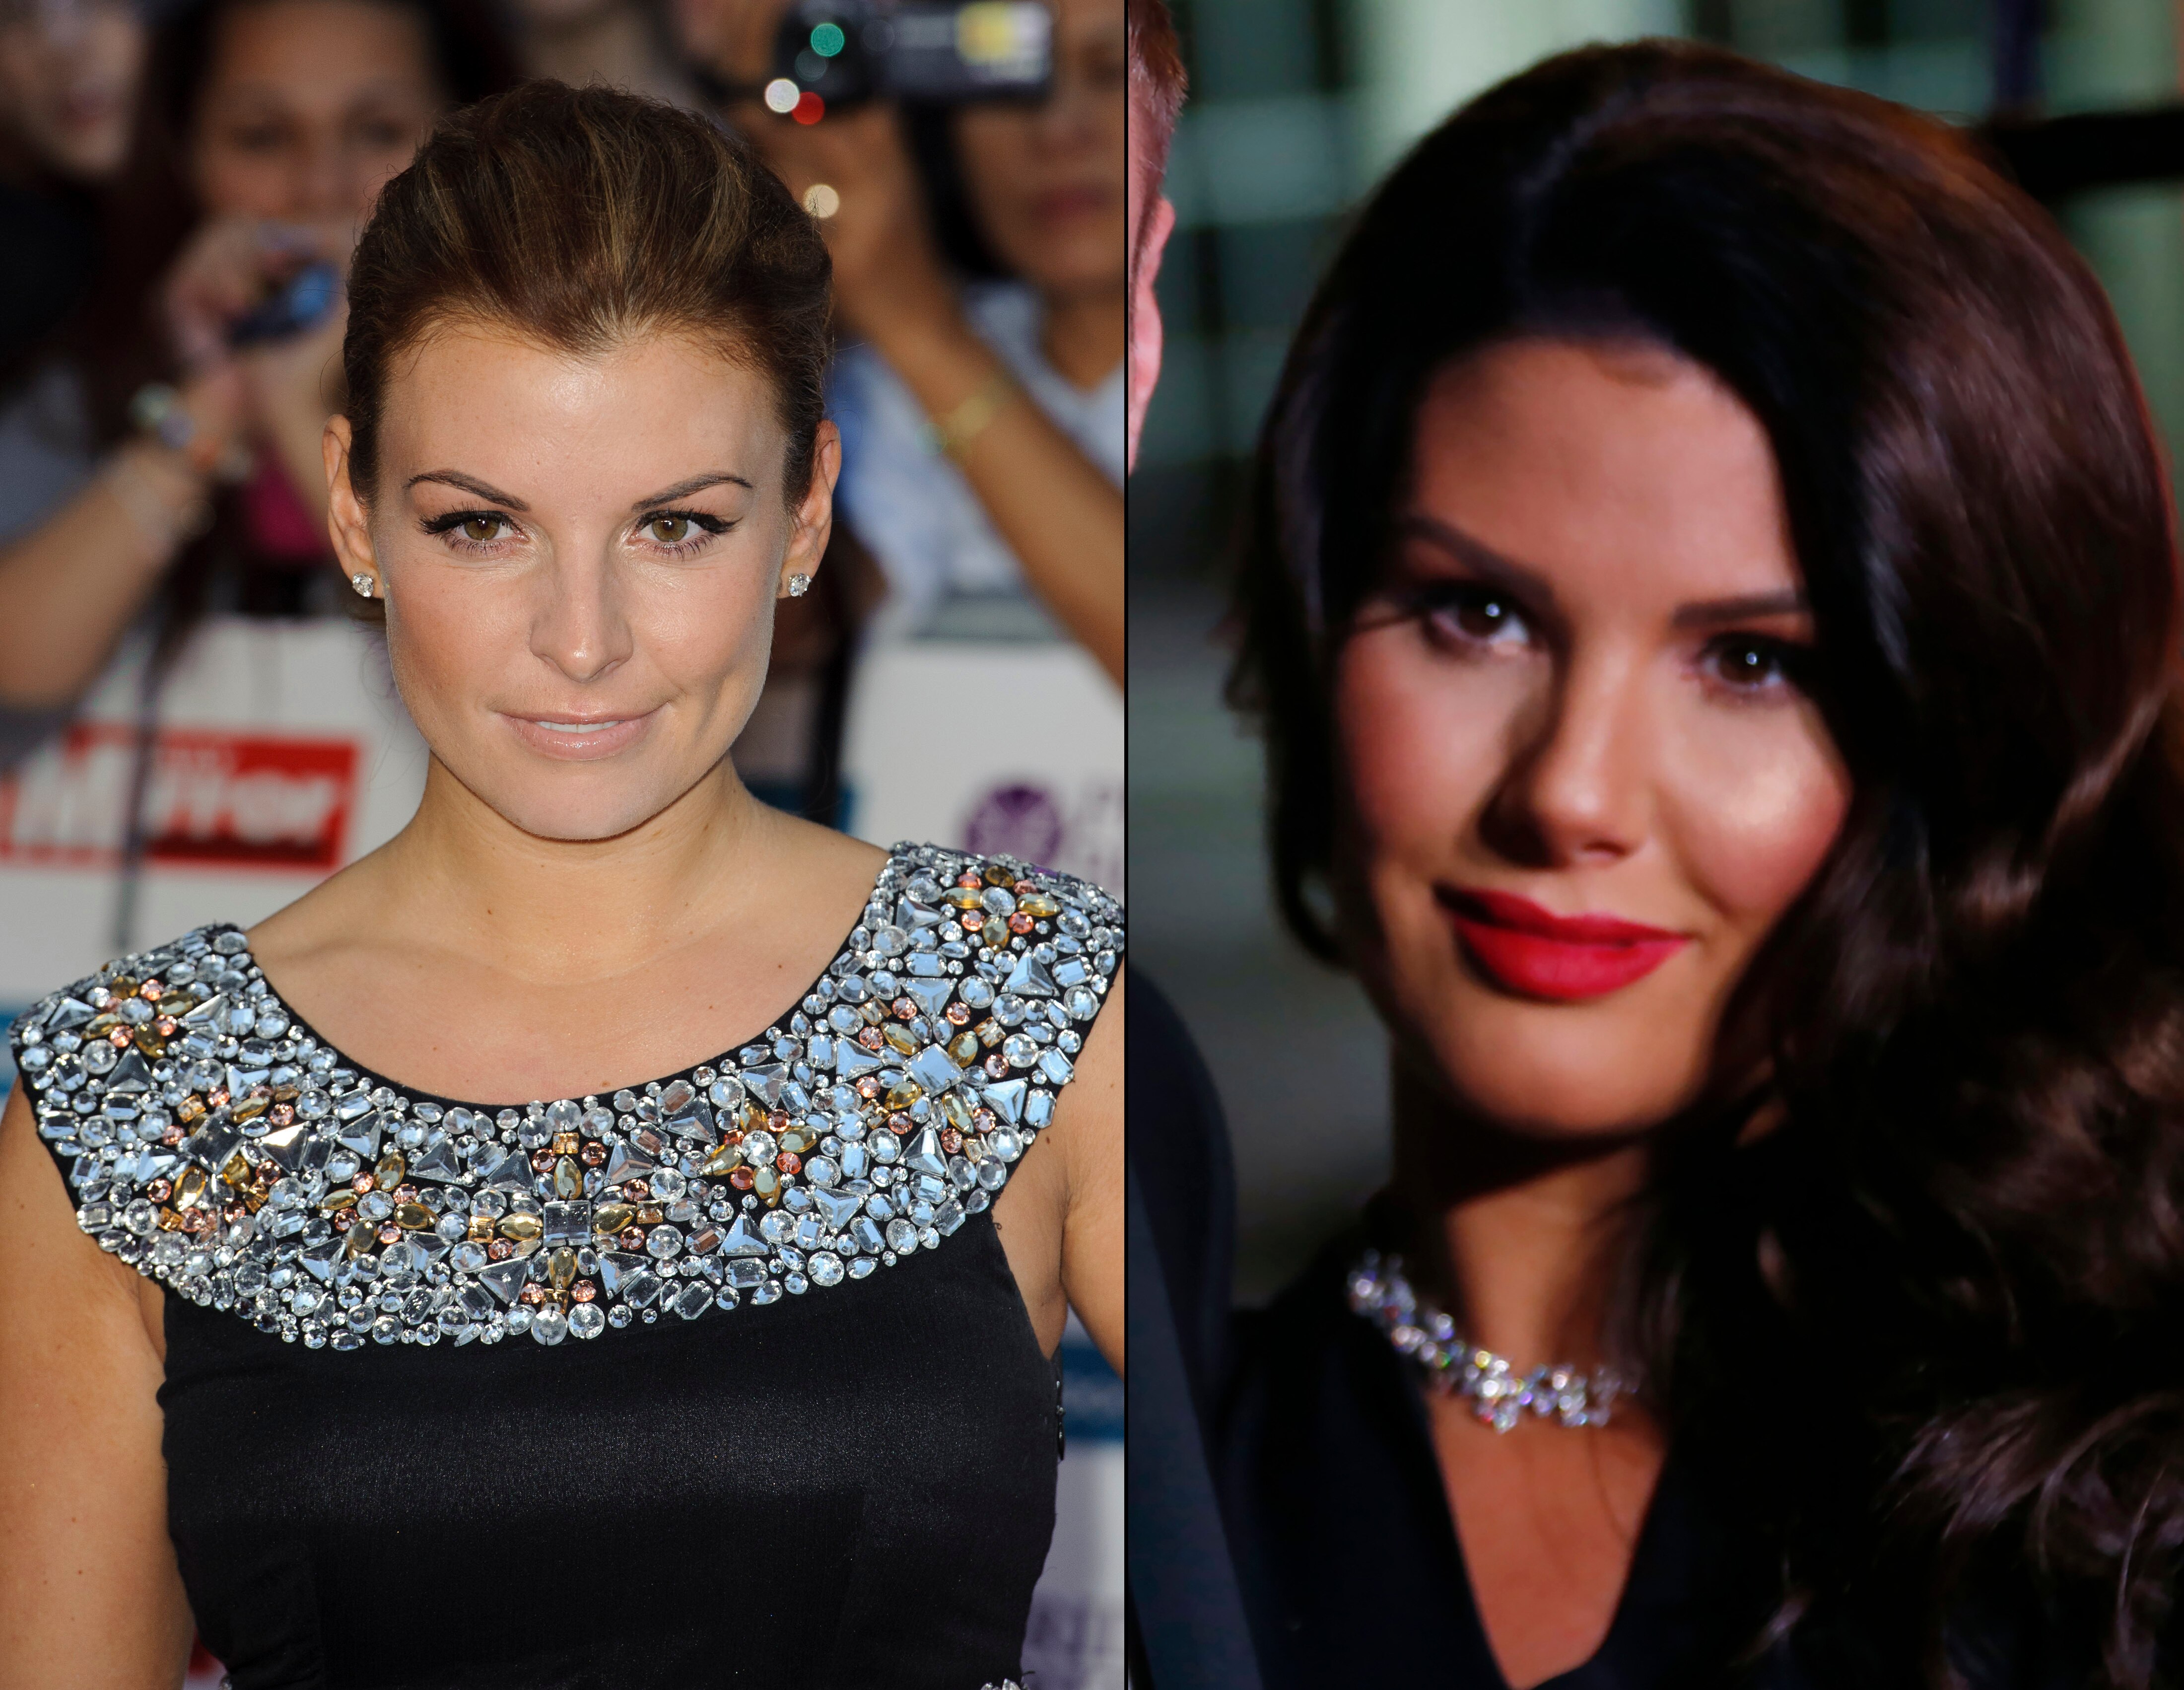 A composite image of Coleen Rooney and Rebekah Vardy